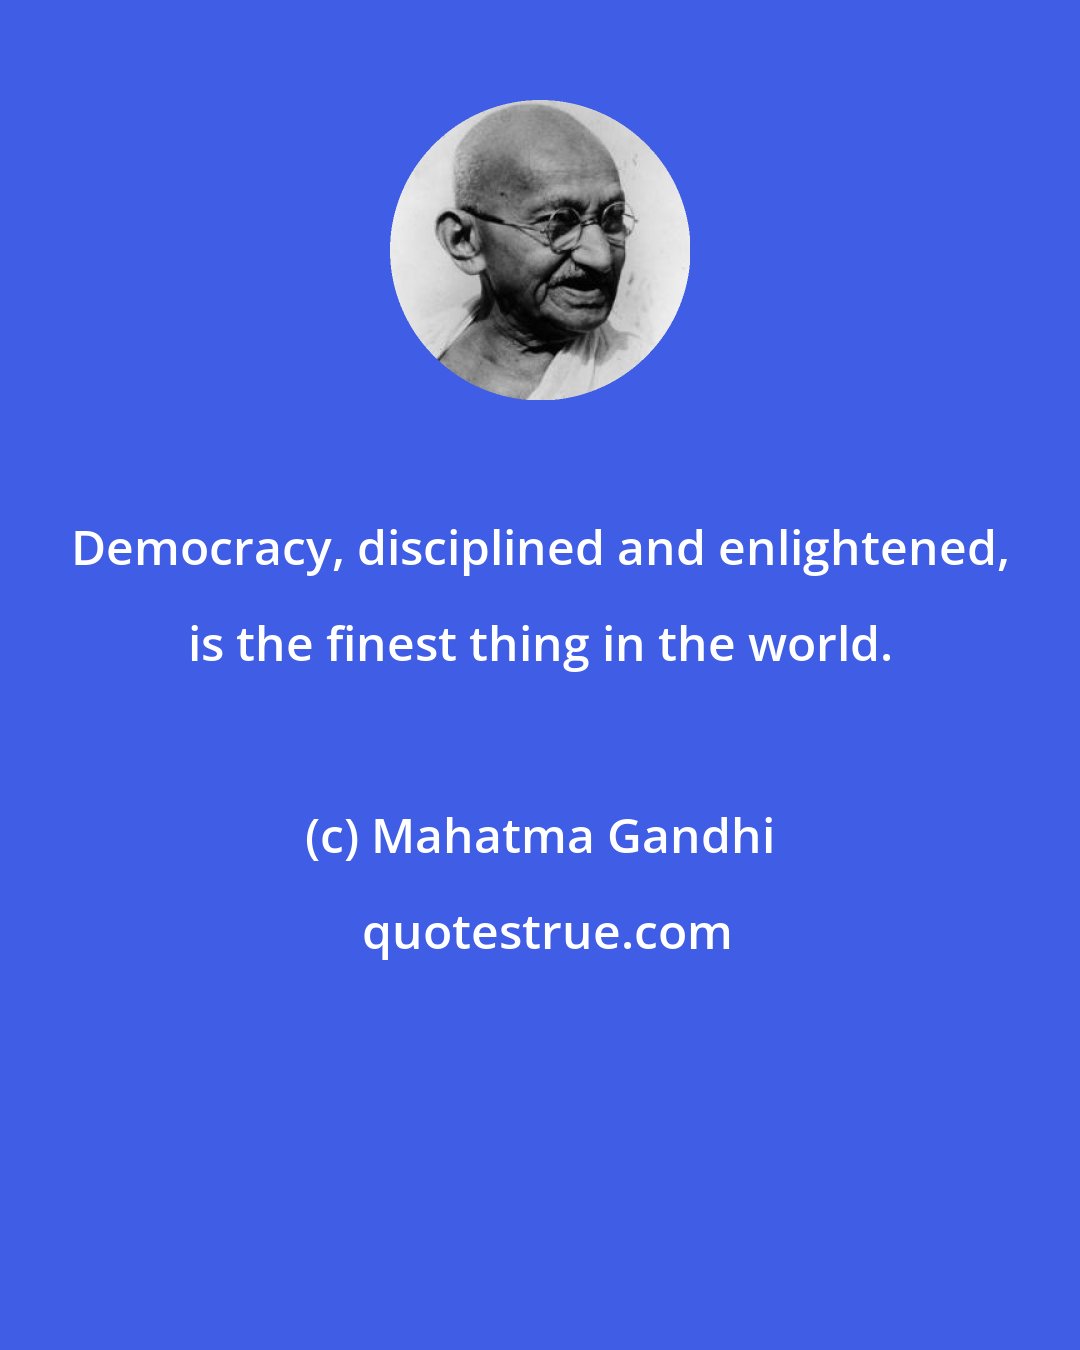 Mahatma Gandhi: Democracy, disciplined and enlightened, is the finest thing in the world.